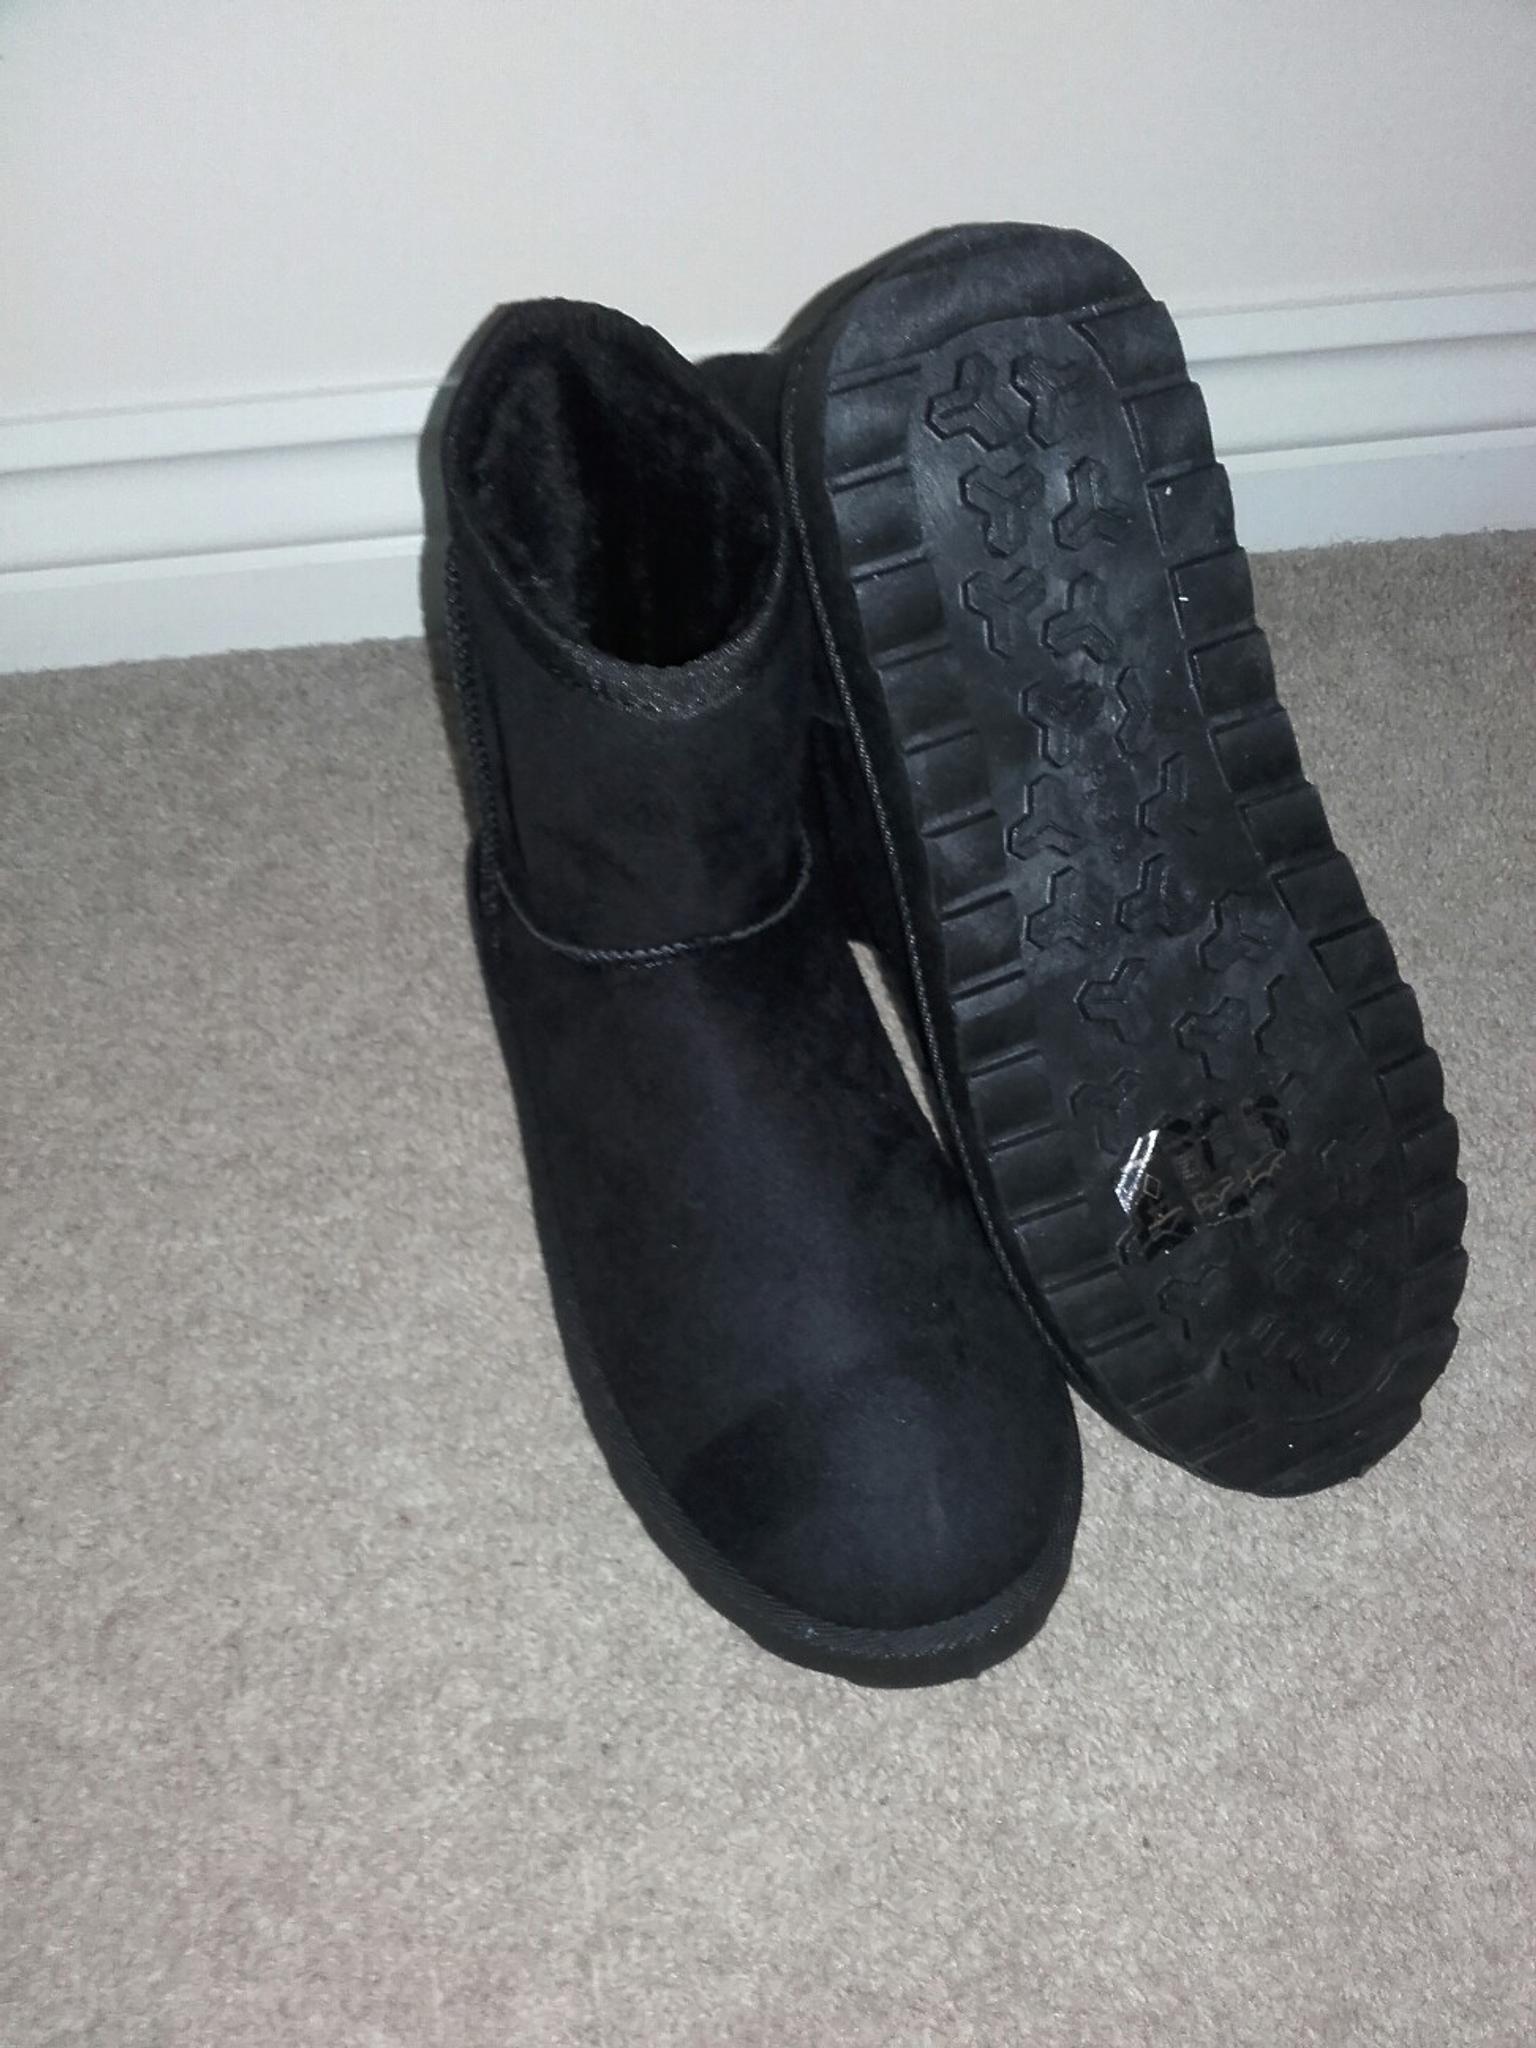 ugg boots cardiff